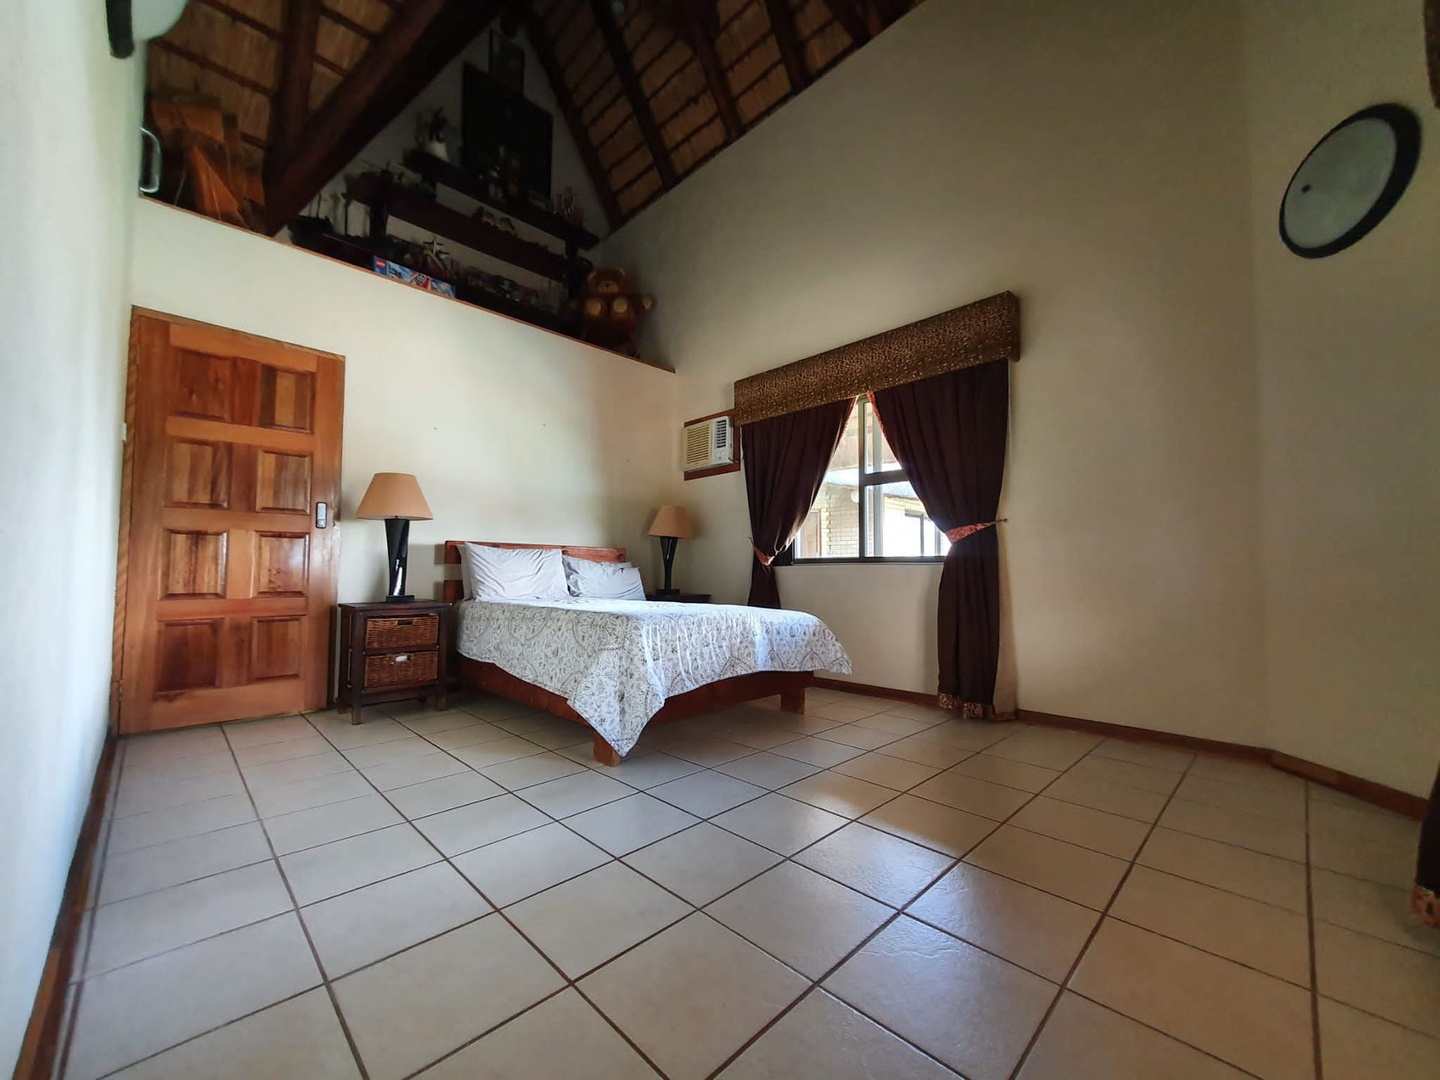 House for sale in private game reserve